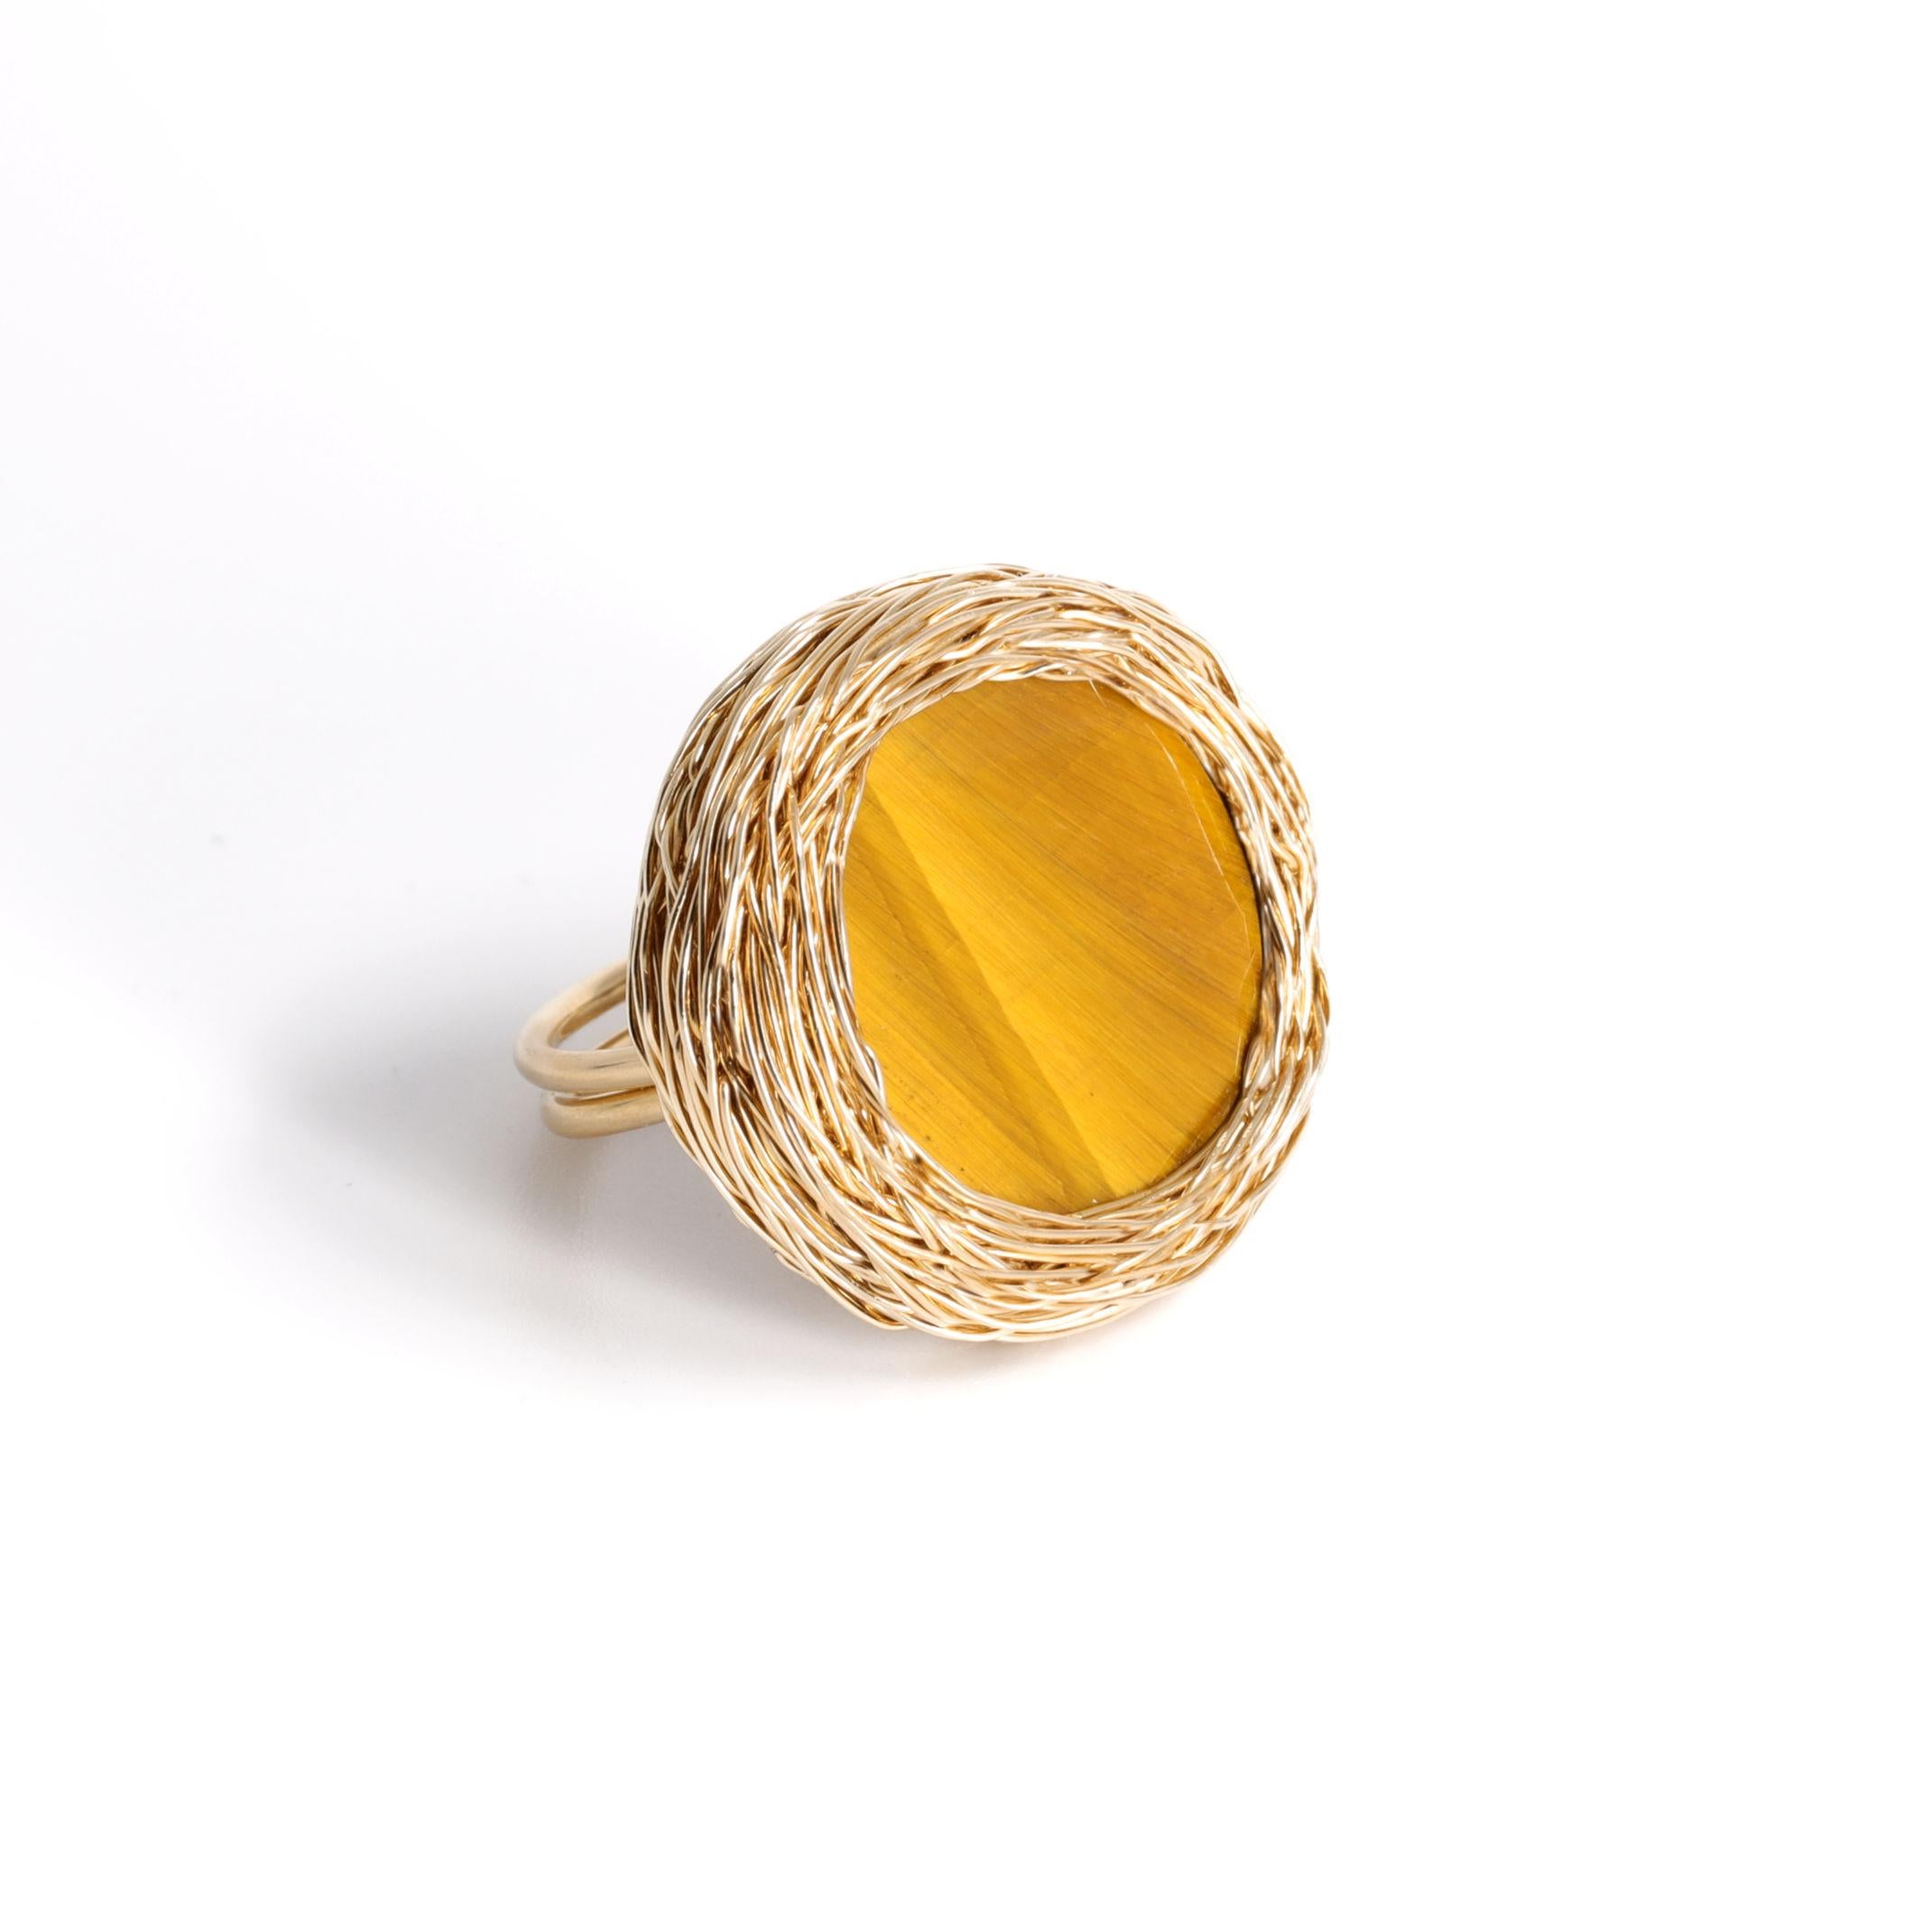 Golden Tiger Eye Stone Stone Ring in 14 Karat Gold Filled Ring by the Artist 6